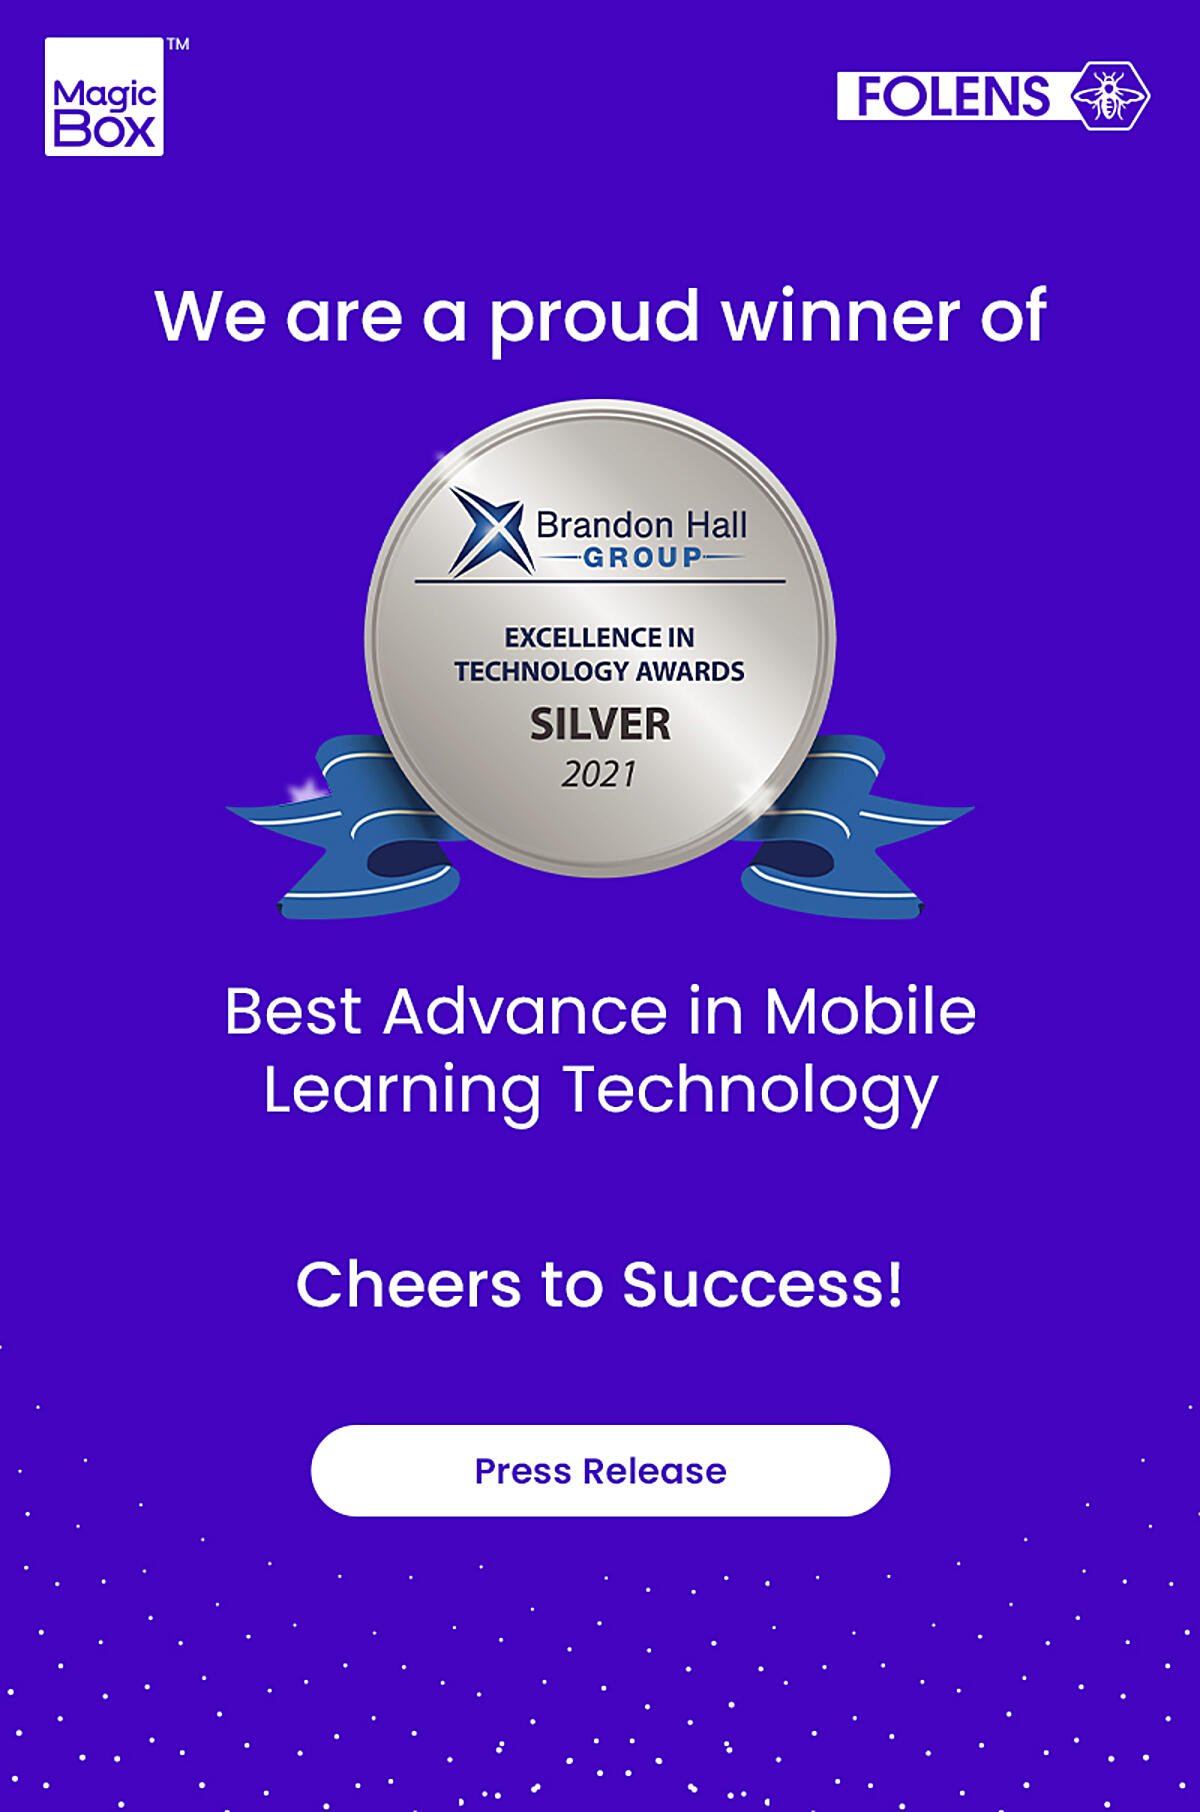 MagicBox and Folens Bag a Silver at 2021 Brandon Hall Excellence in Technology Awards